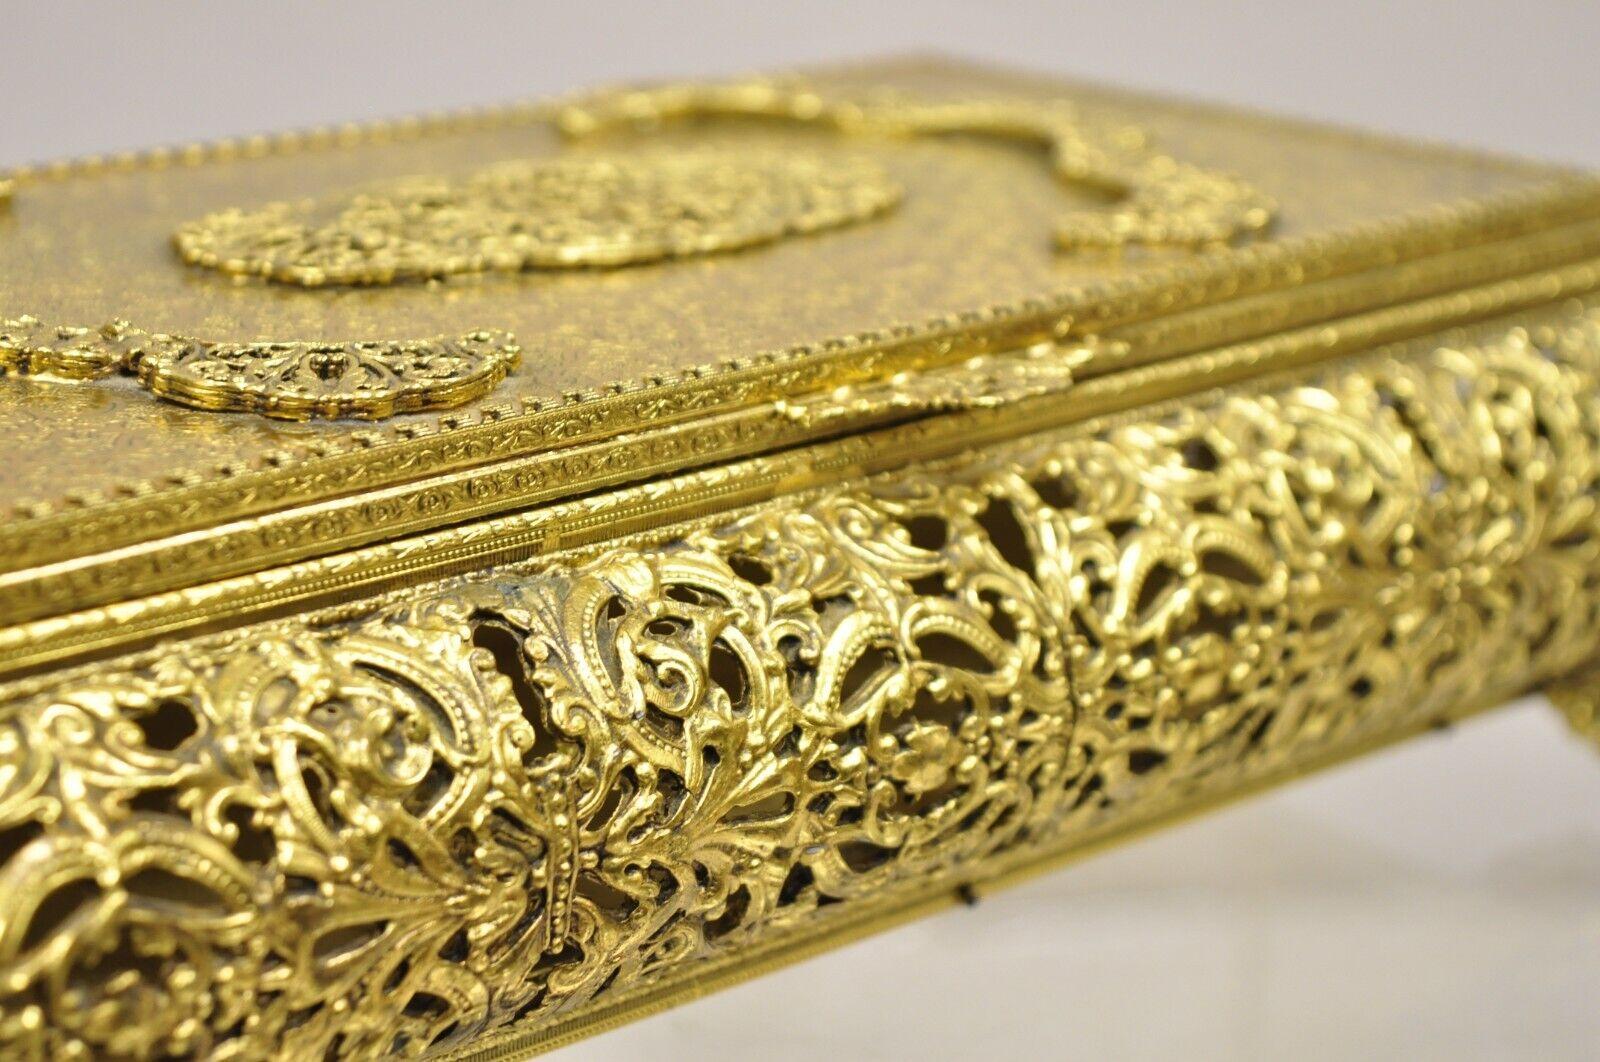 Vtg French Hollywood Regency Style Gold Filigree Vanity Jewelry Box by Globe For Sale 4